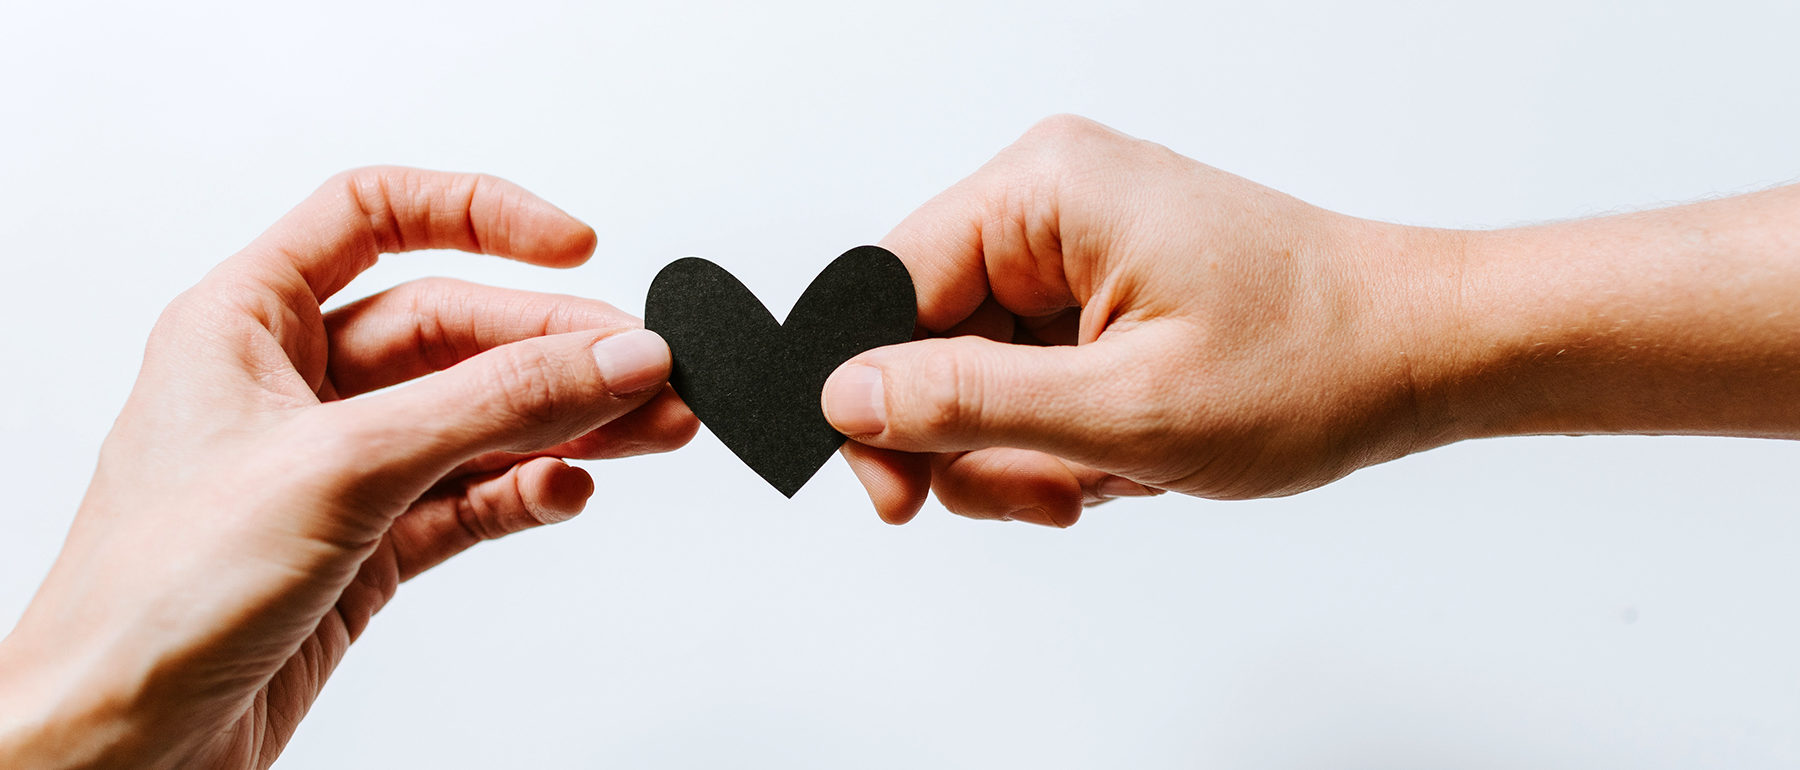 Two hands holding one small black heart between them